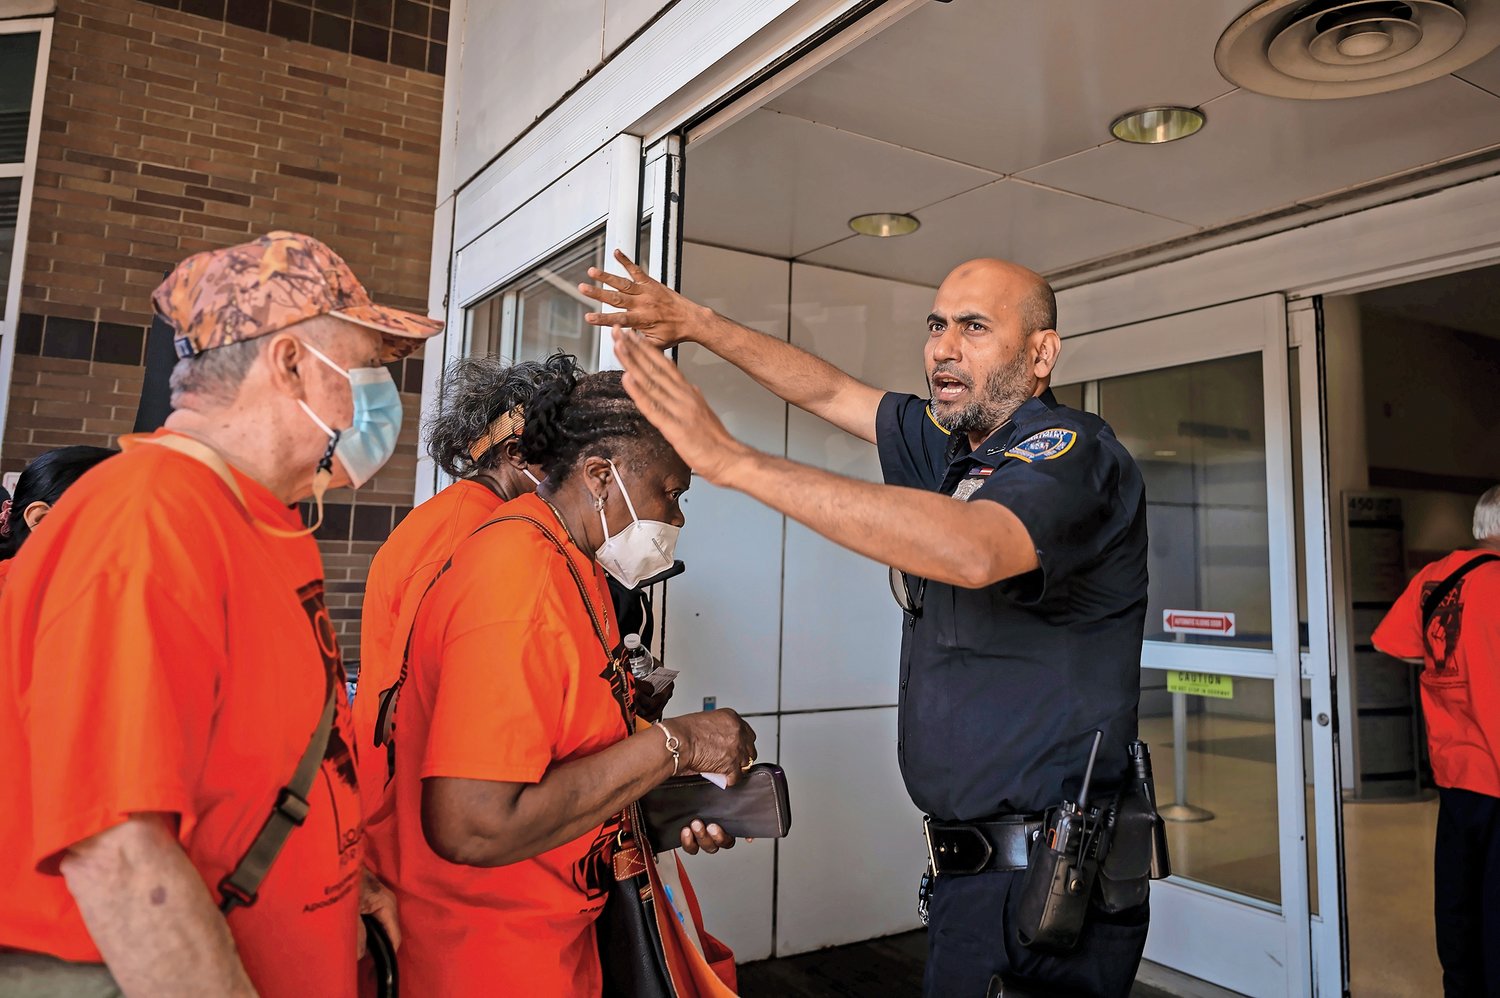 On arrival, rally members were urged to form a line to enter the Rent Guidelines Board hearing in small groups by Hostos Community College public safety officers.